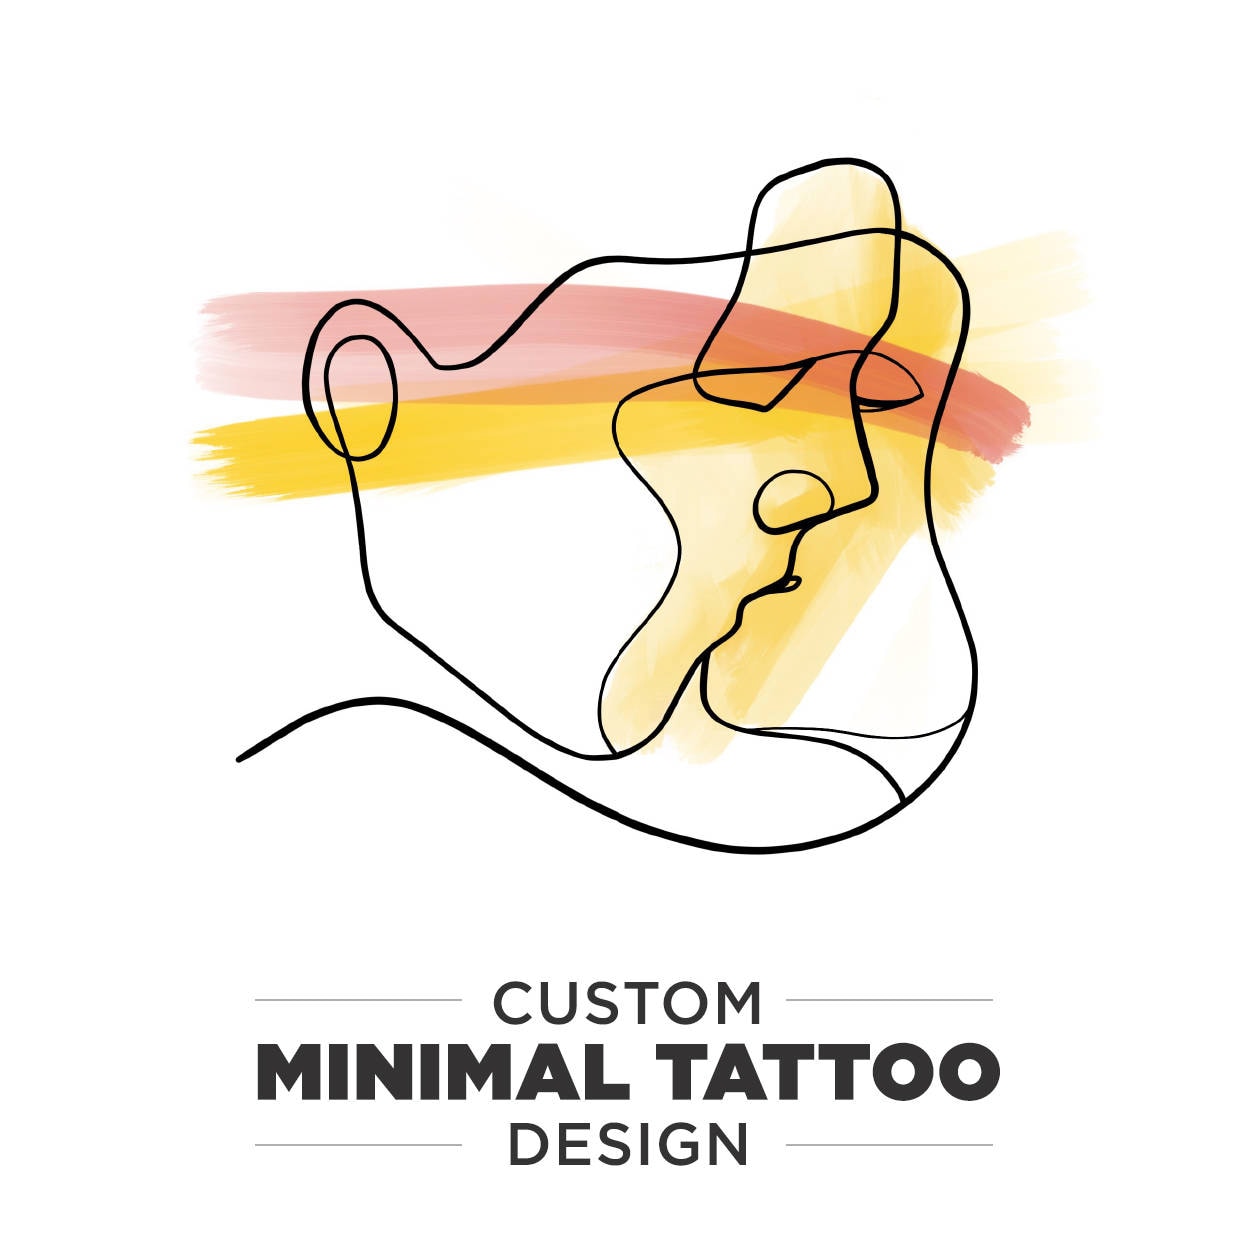 Tailormade design tattoo customized  We bespoke tattoo designer we design  your custom tattoo according to your wishes